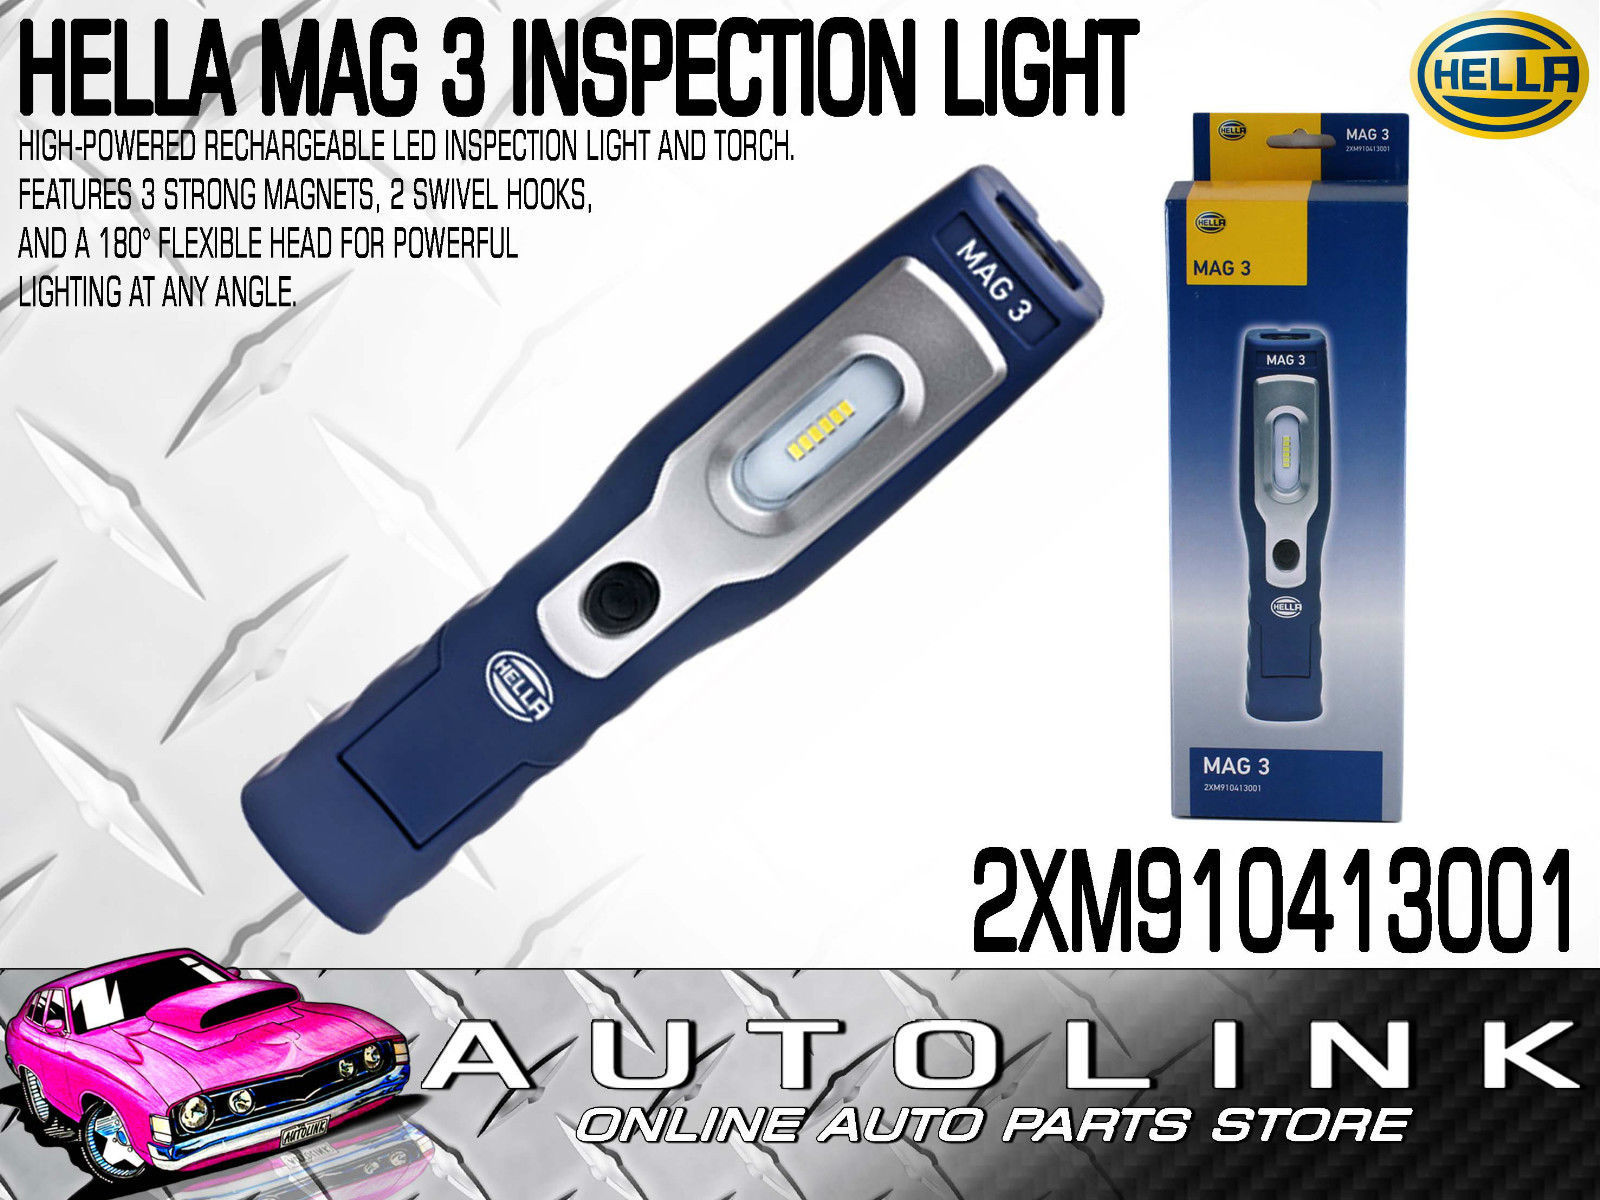 HELLA MAG 3 HIGH-POWERED RECHARGEABLE LED INSPECTION LIGHT ...